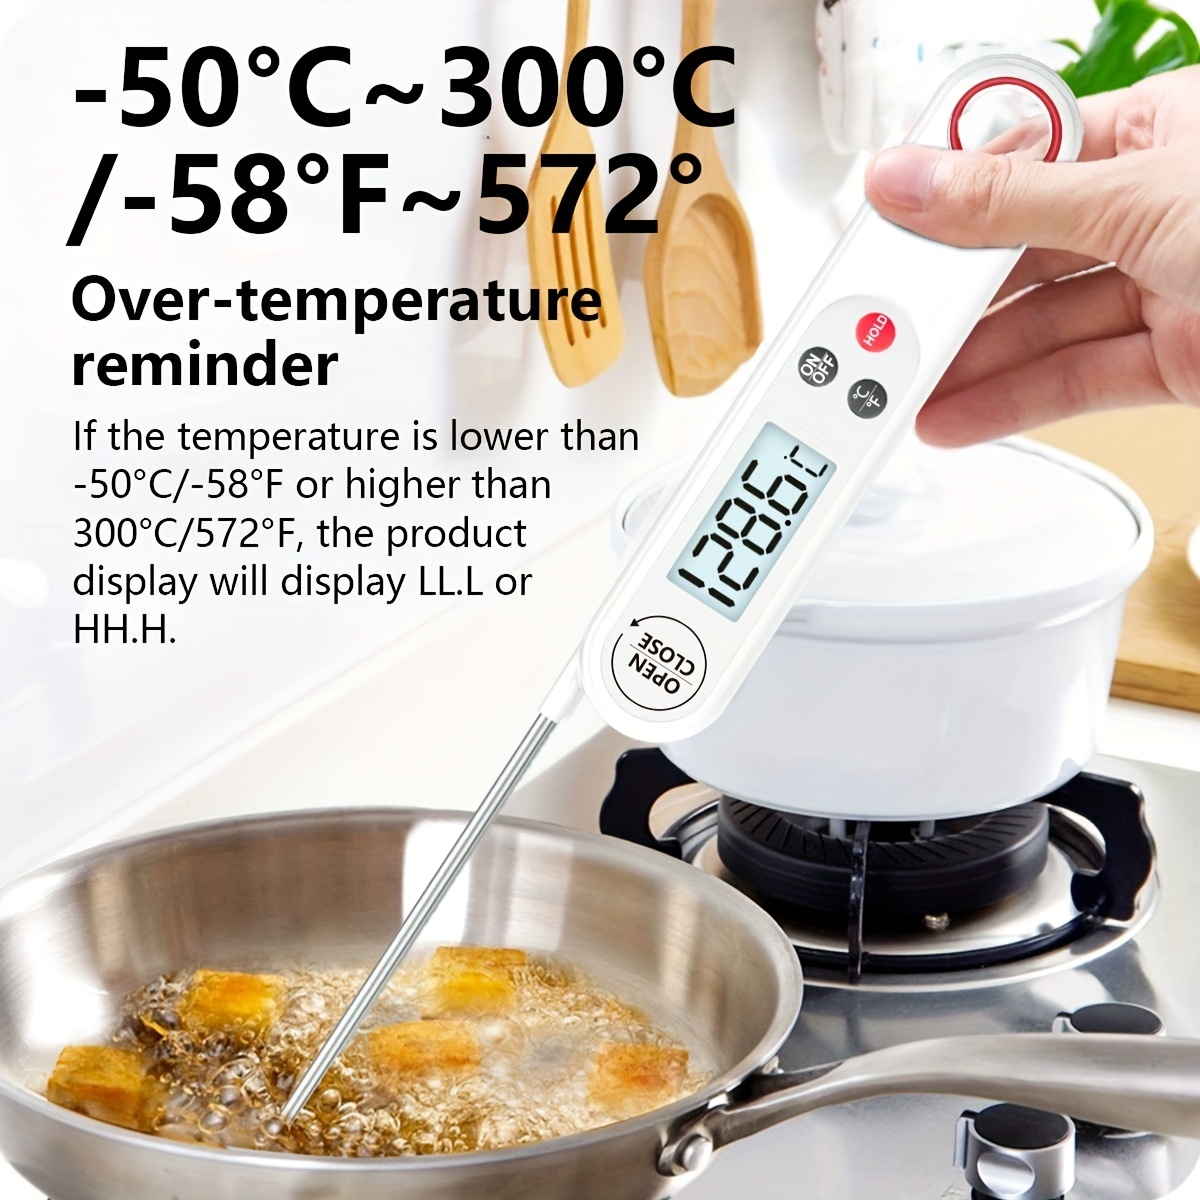 YZ6011 Rapid Thermometer 145mm Probe Waterproof Electronic Food